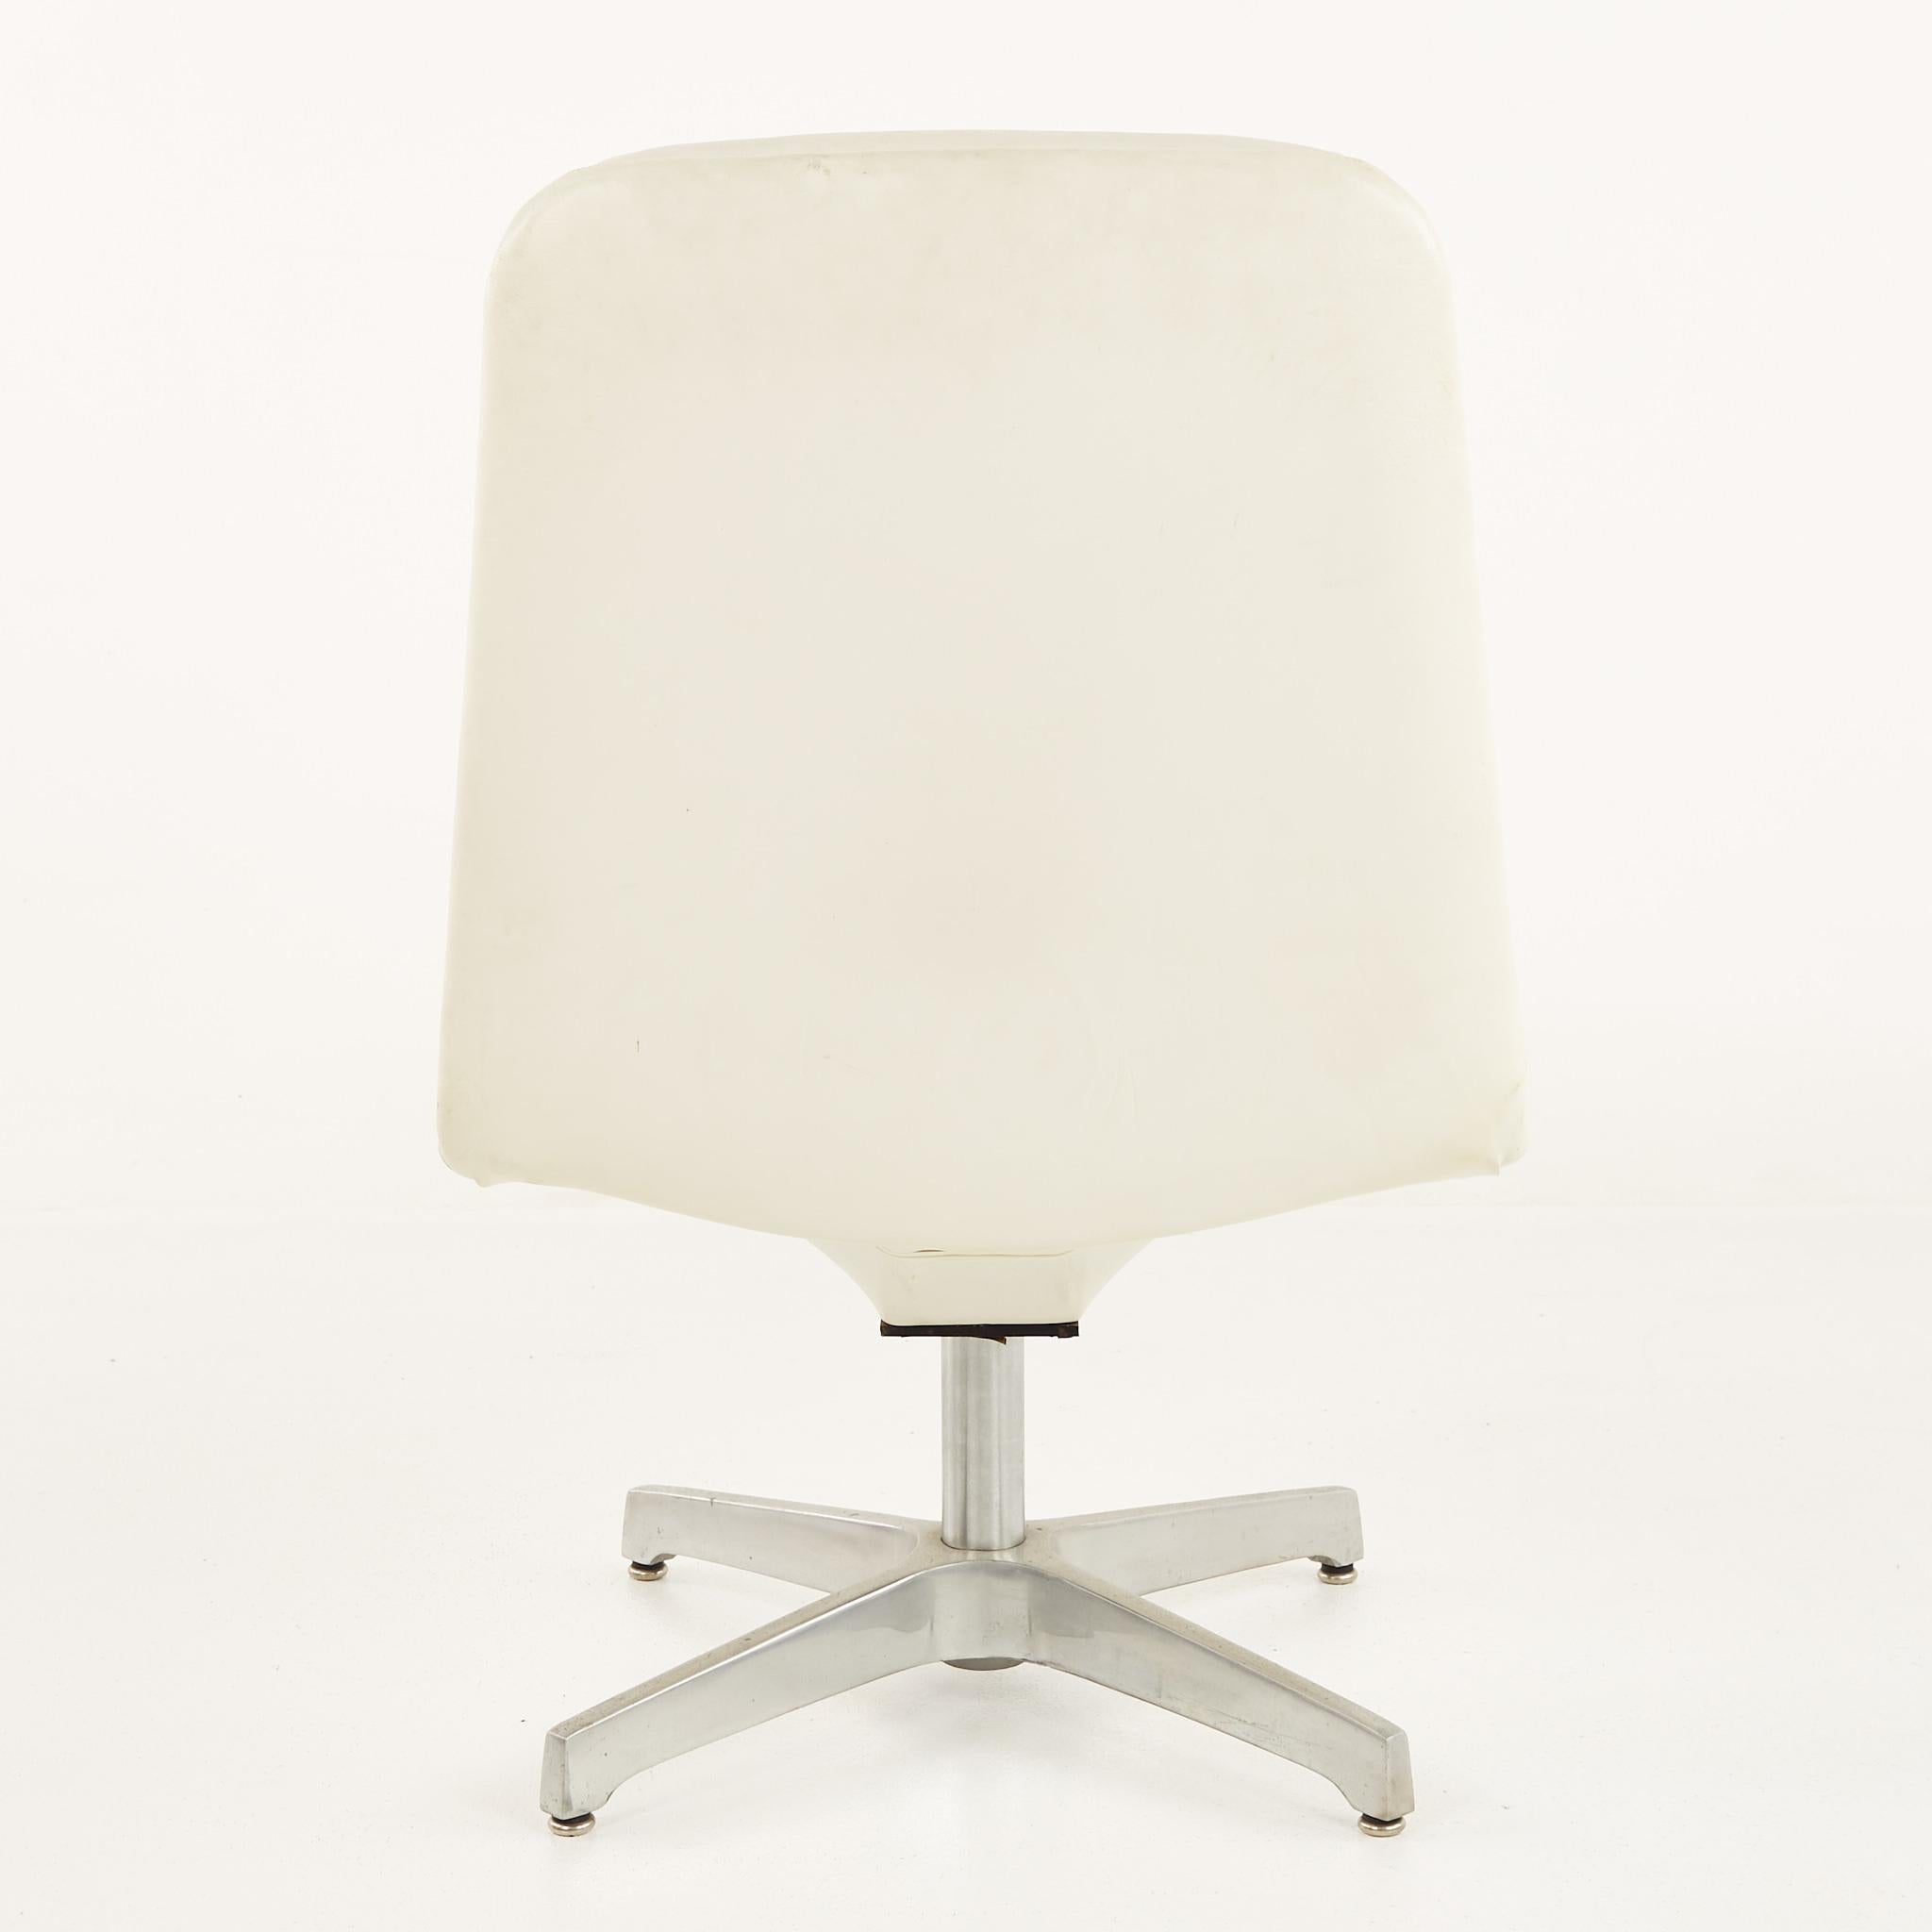 Late 20th Century Chromcraft Style MCM White Vinyl and Aluminum Tufted Swivel Dining Chairs, 4 For Sale